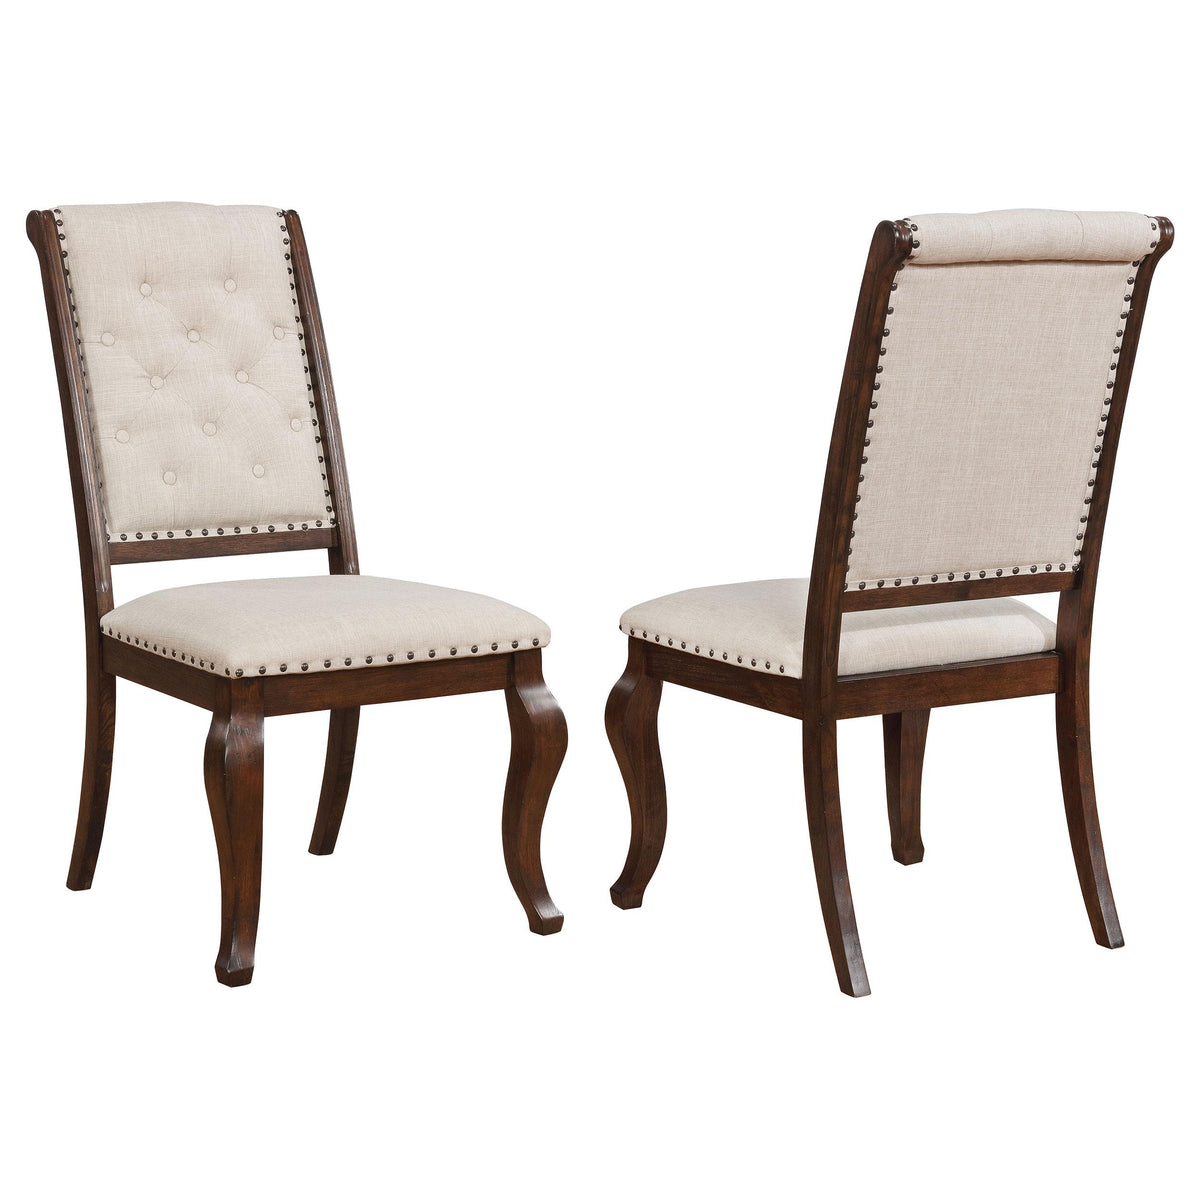 Brockway Tufted Dining Chairs Cream and Antique Java (Set of 2) Brockway Tufted Dining Chairs Cream and Antique Java (Set of 2) Half Price Furniture